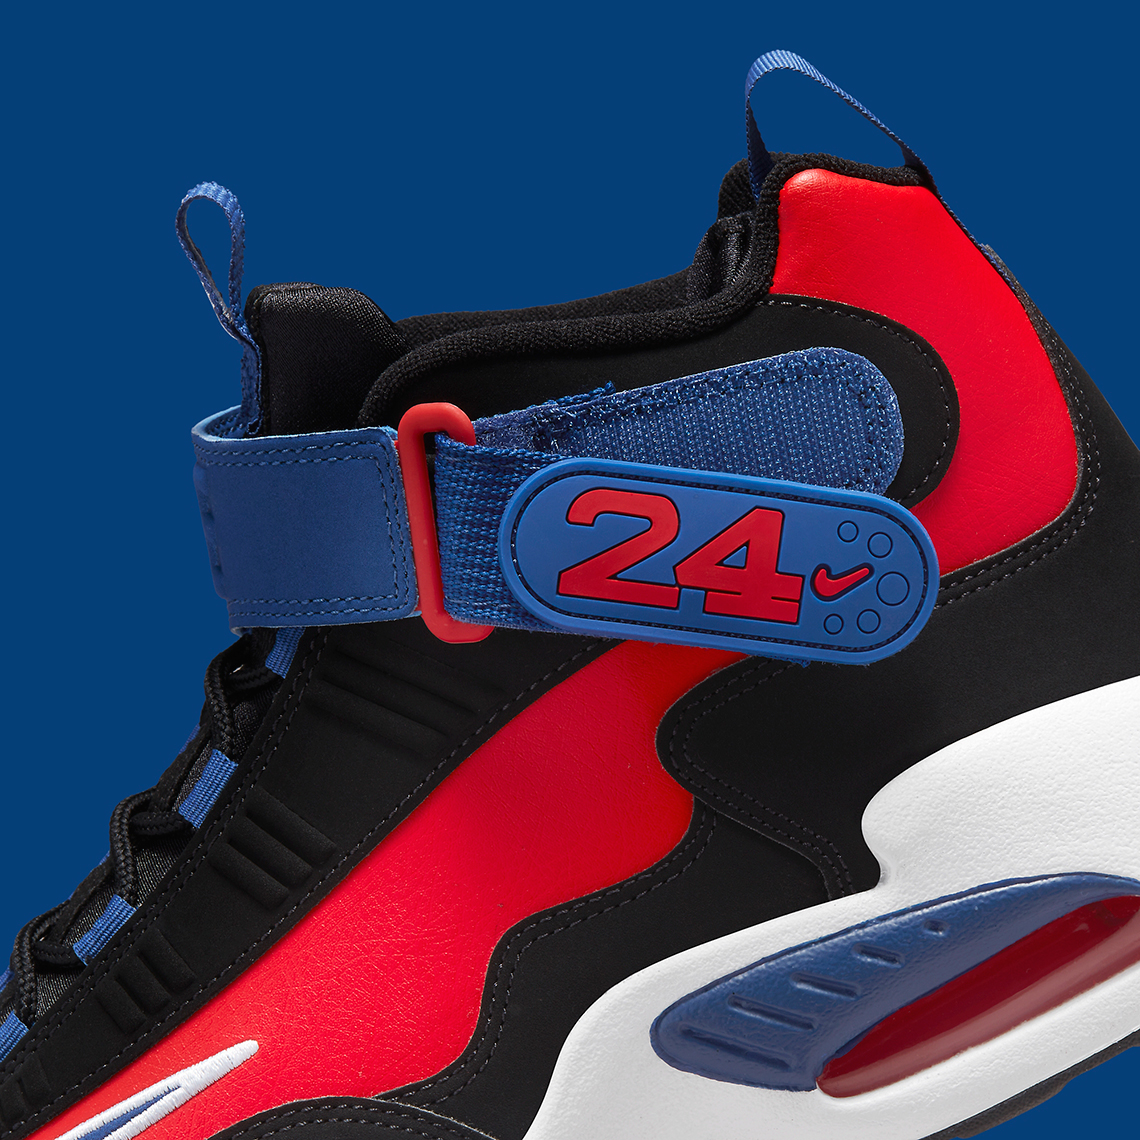 Nike Air Griffey Max 1 Navy Red Release Date 6